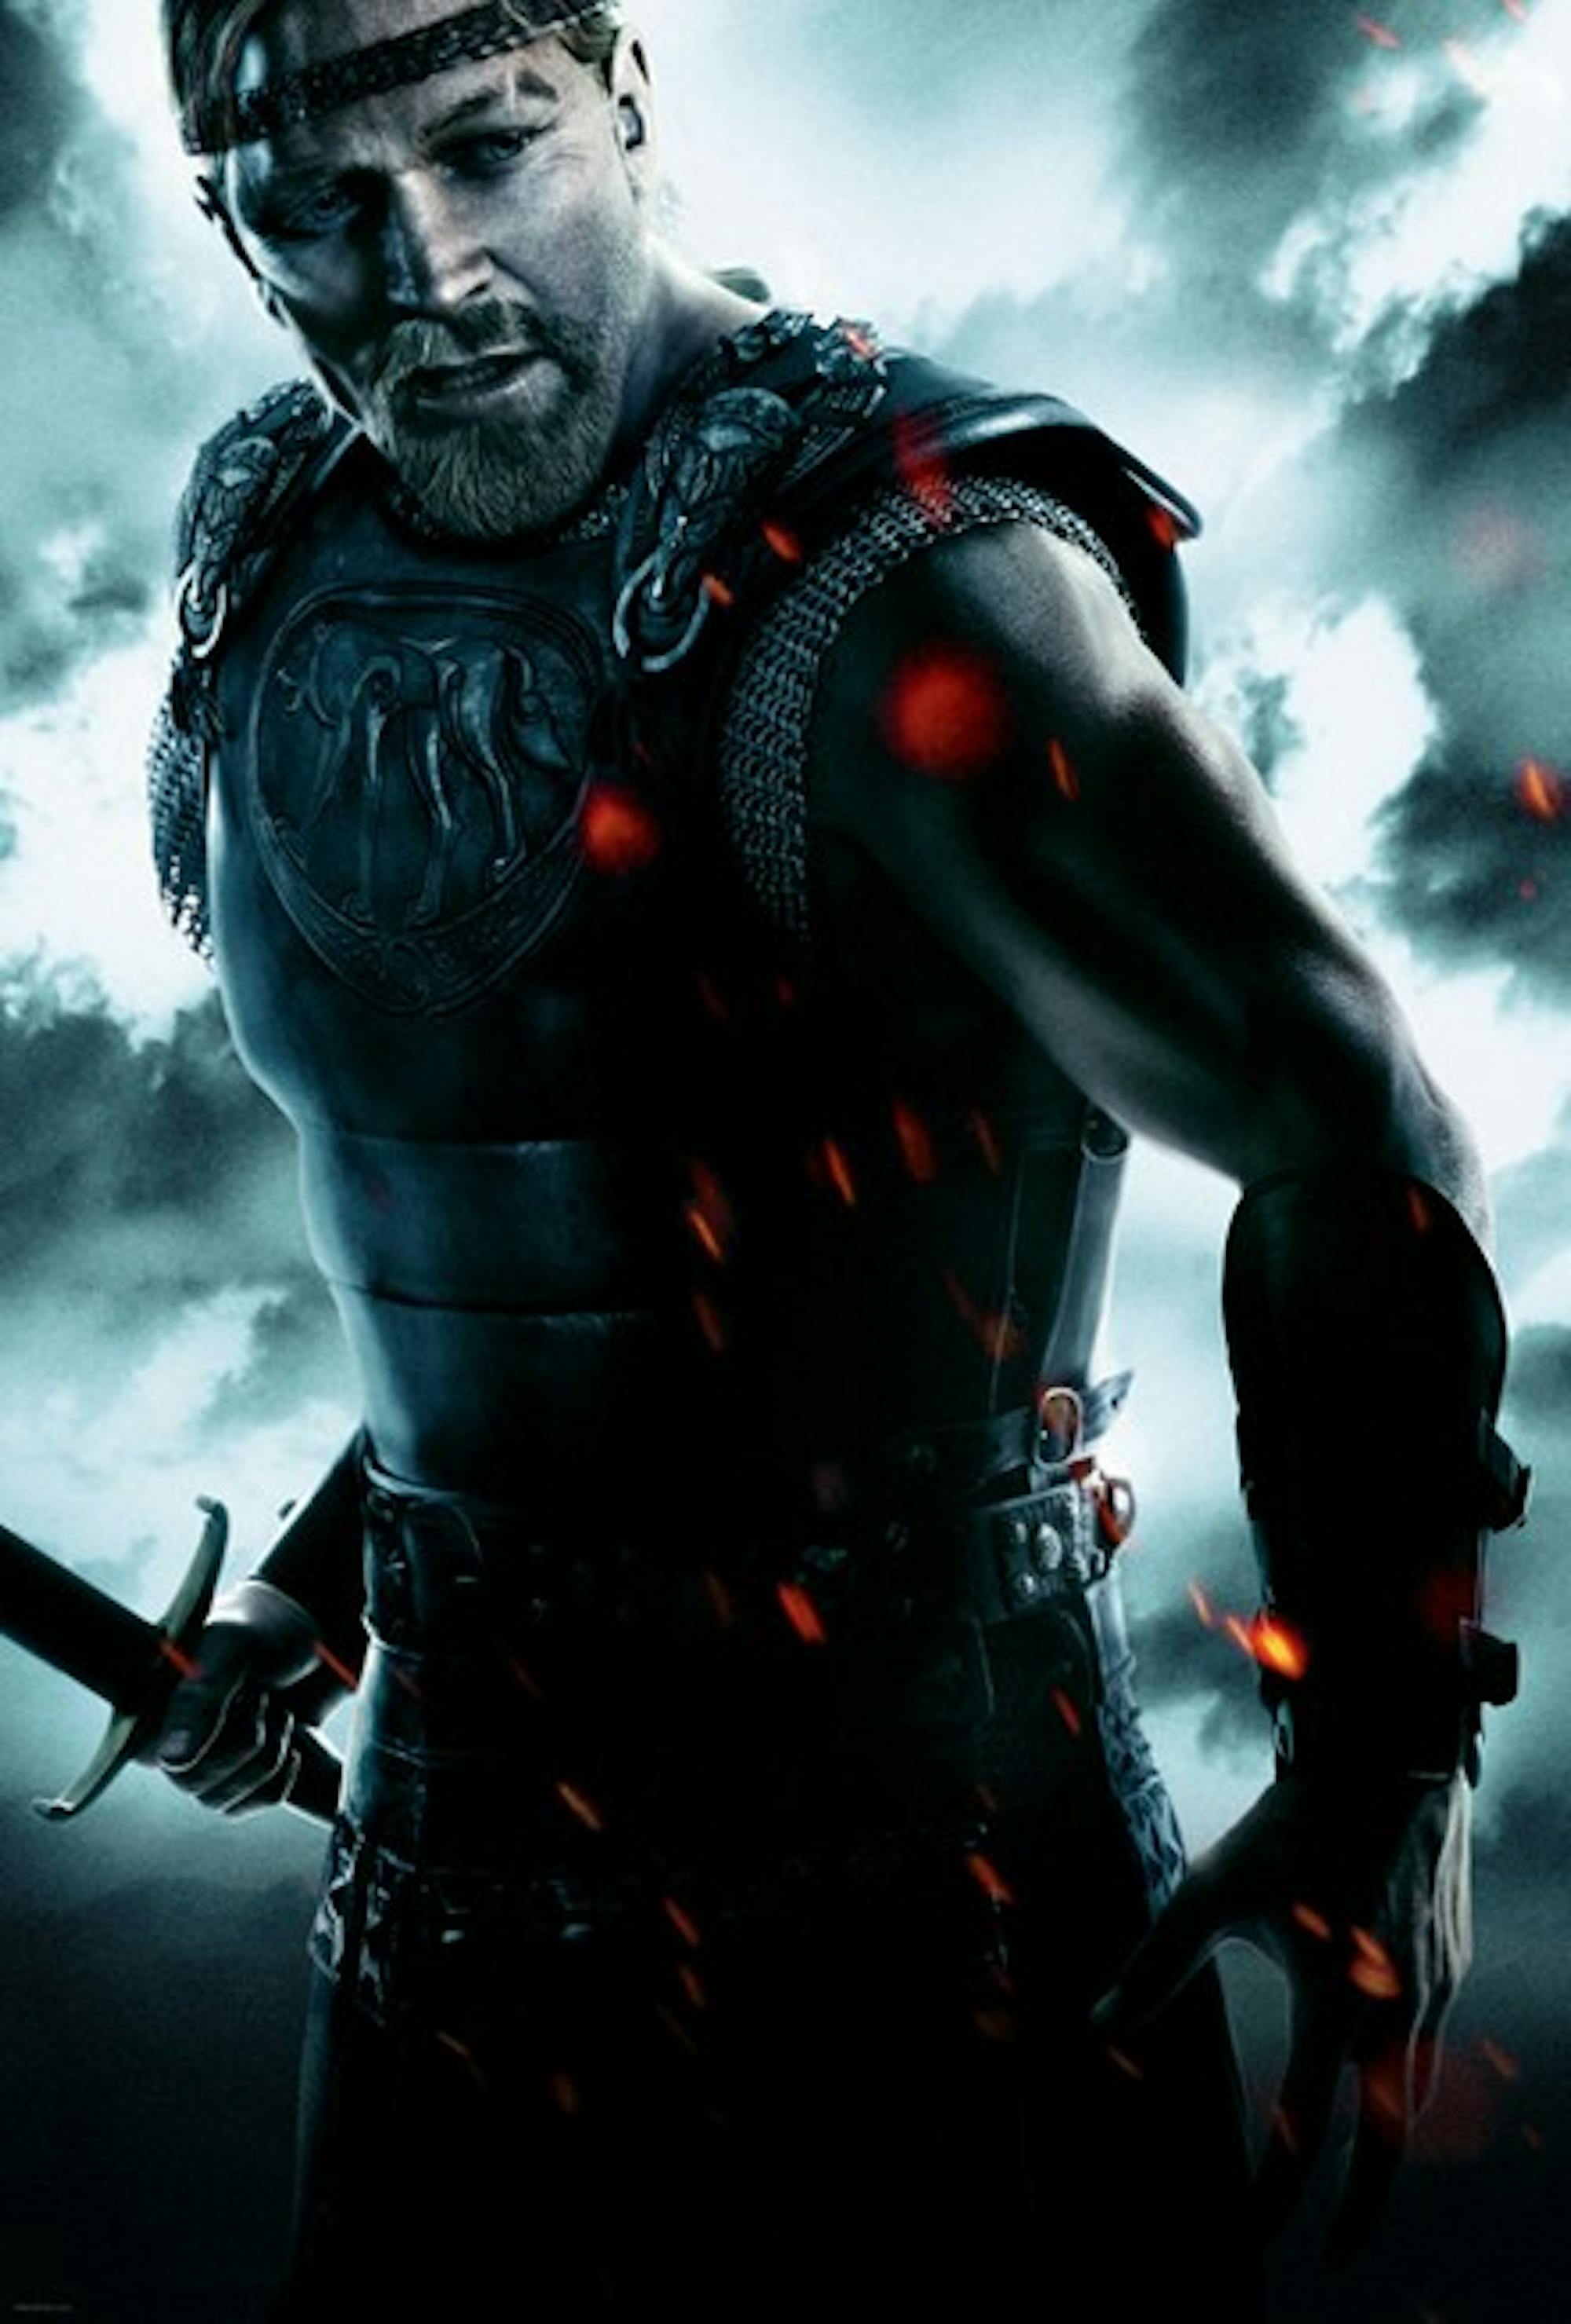 Ray Winstone looks rather svelte as Beowulf, thanks to the film's CGI team.